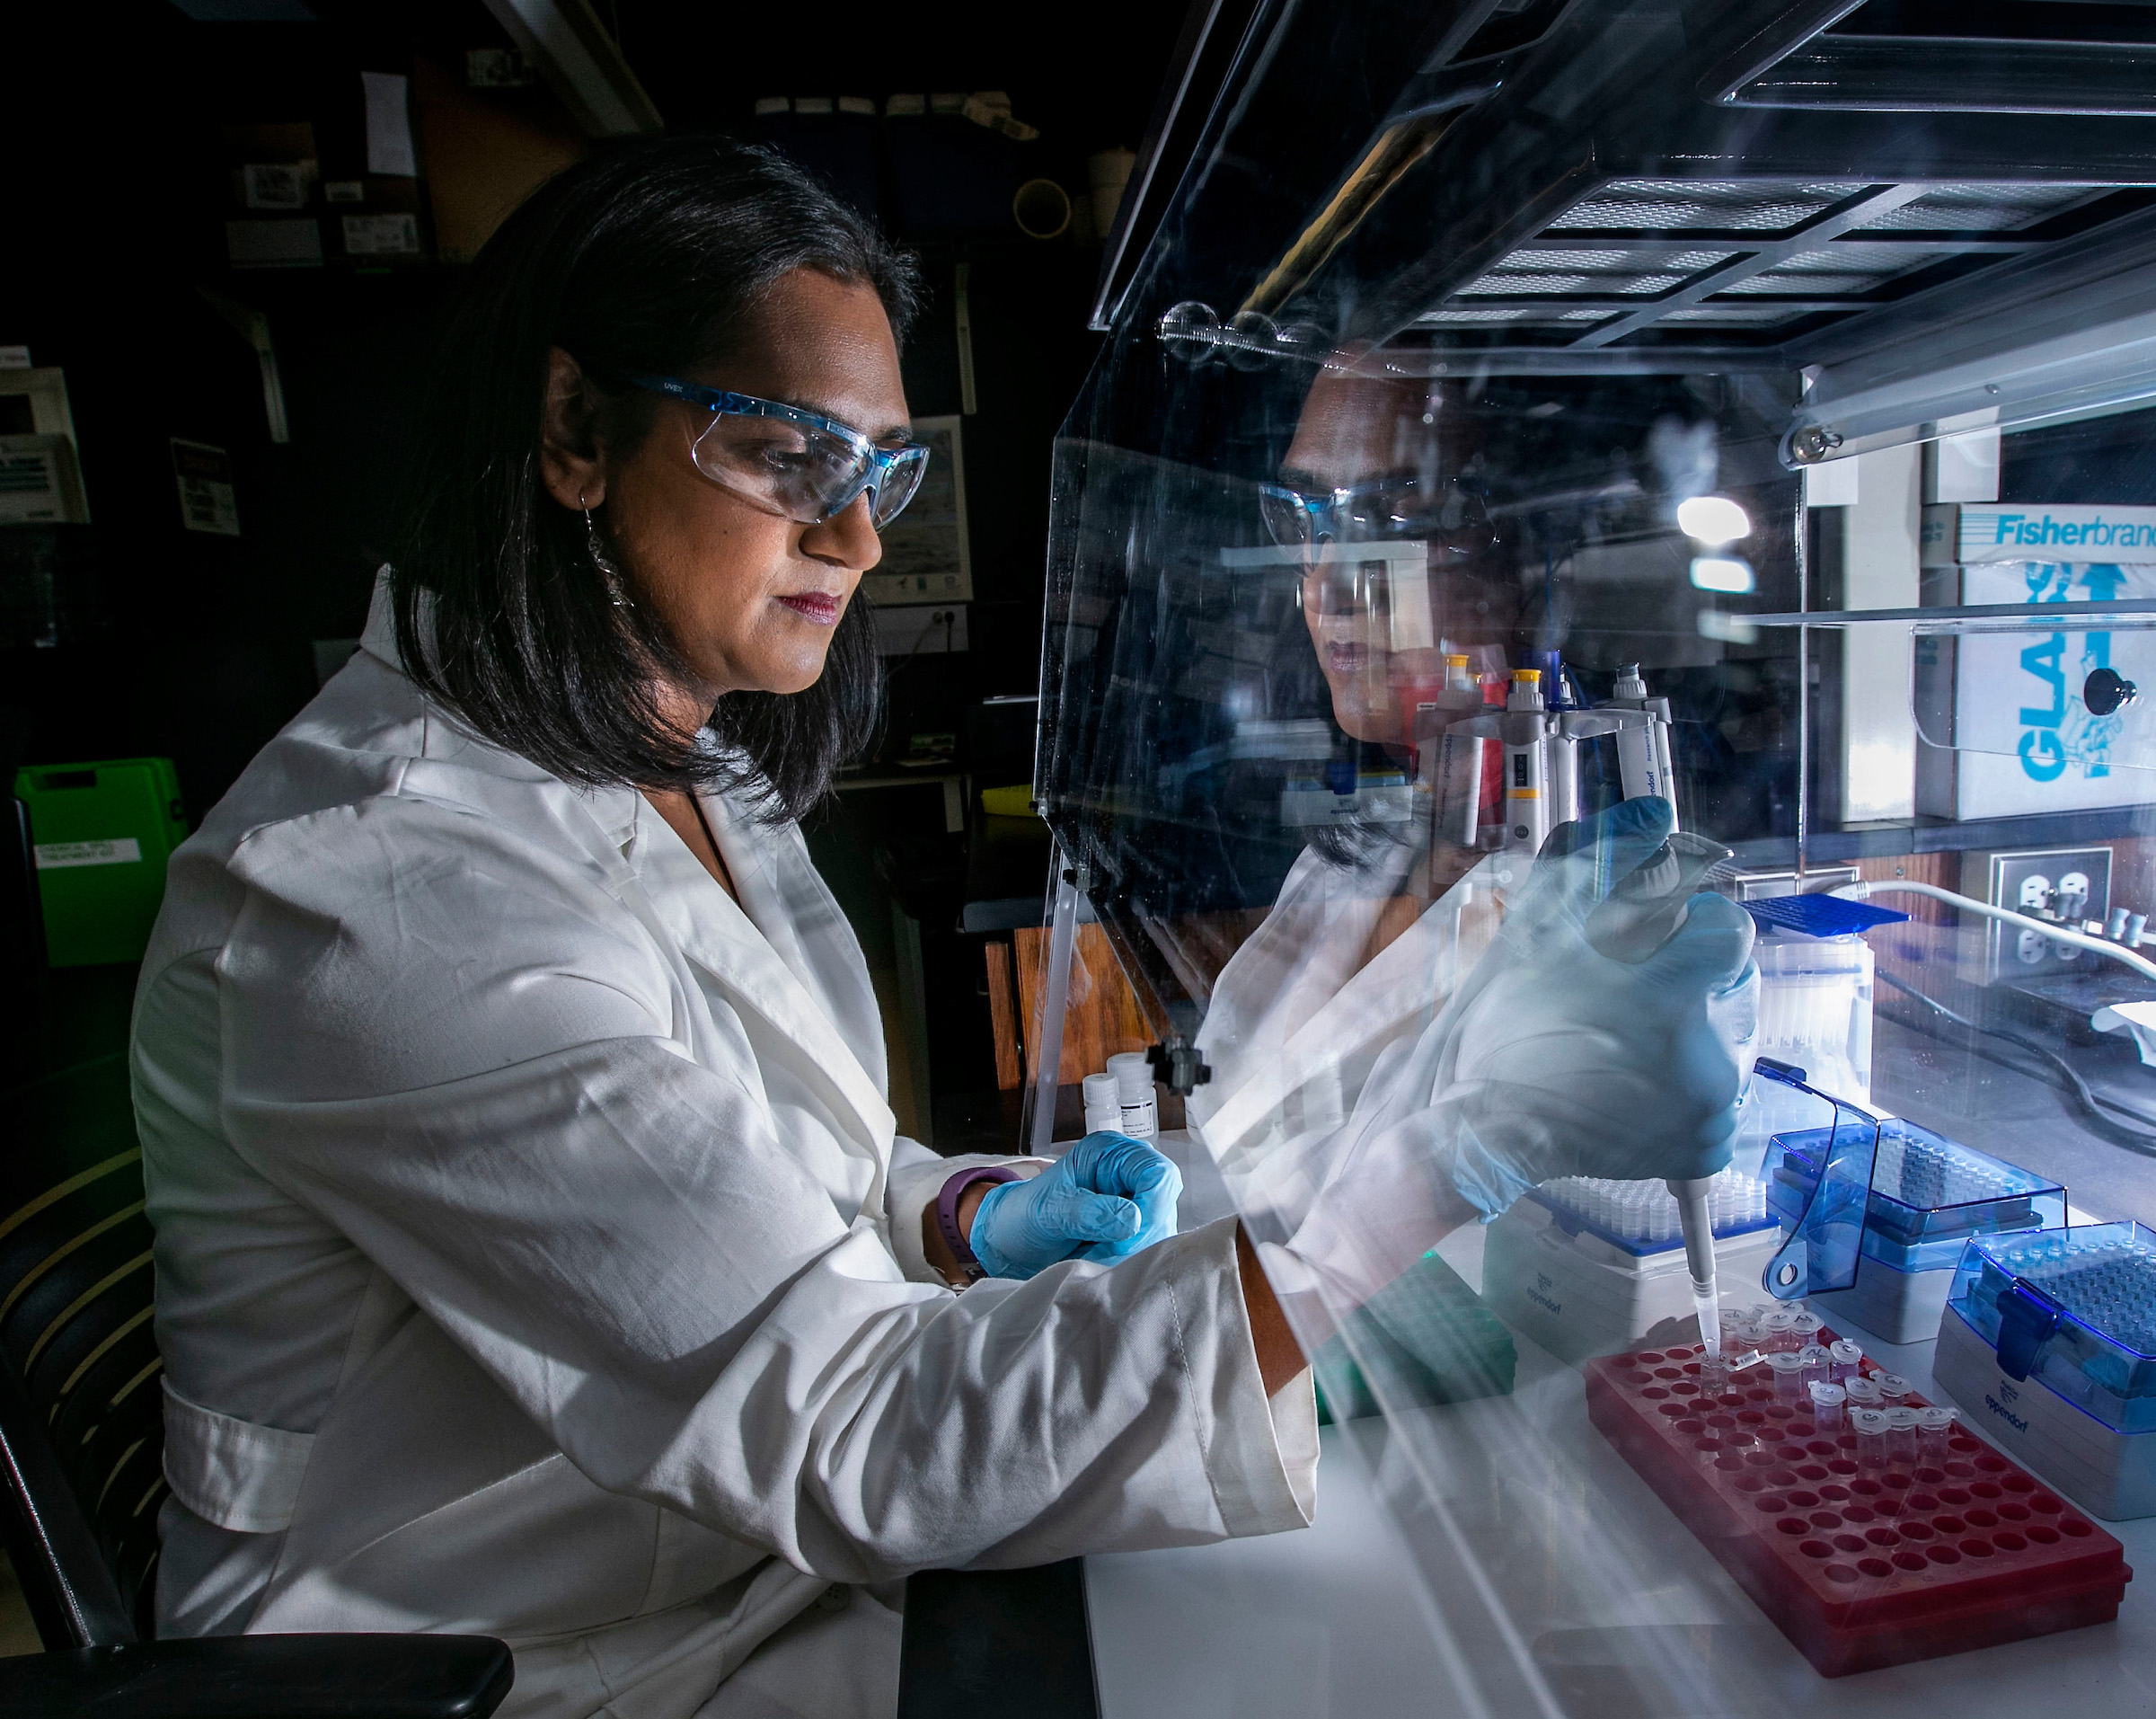 Researcher Bala Chaudhary in her mycorrhizal ecology Lab at DePaul University